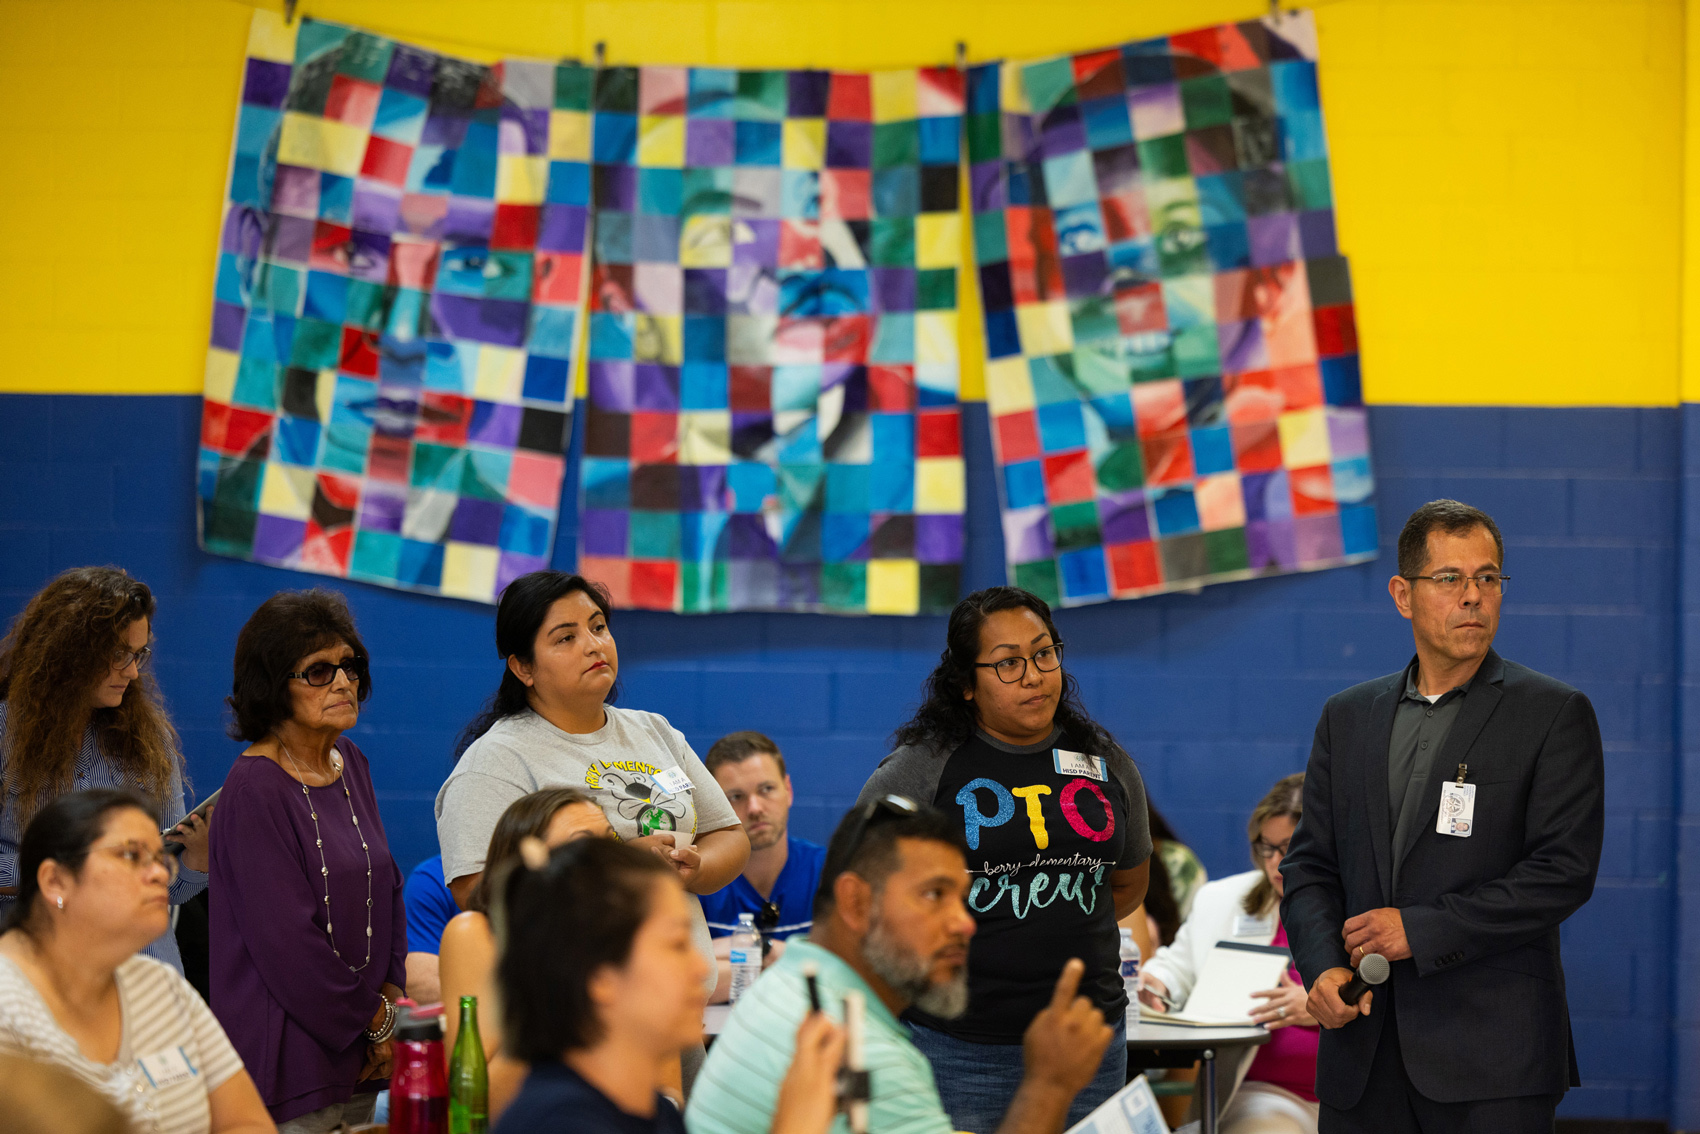 Parents of HISD students wait in line to share concerns with the HISD superintendent Mike Miles during an HISD Family Engagement event at Marshall Middle School, Thursday, July 13, 2023, in Houston.